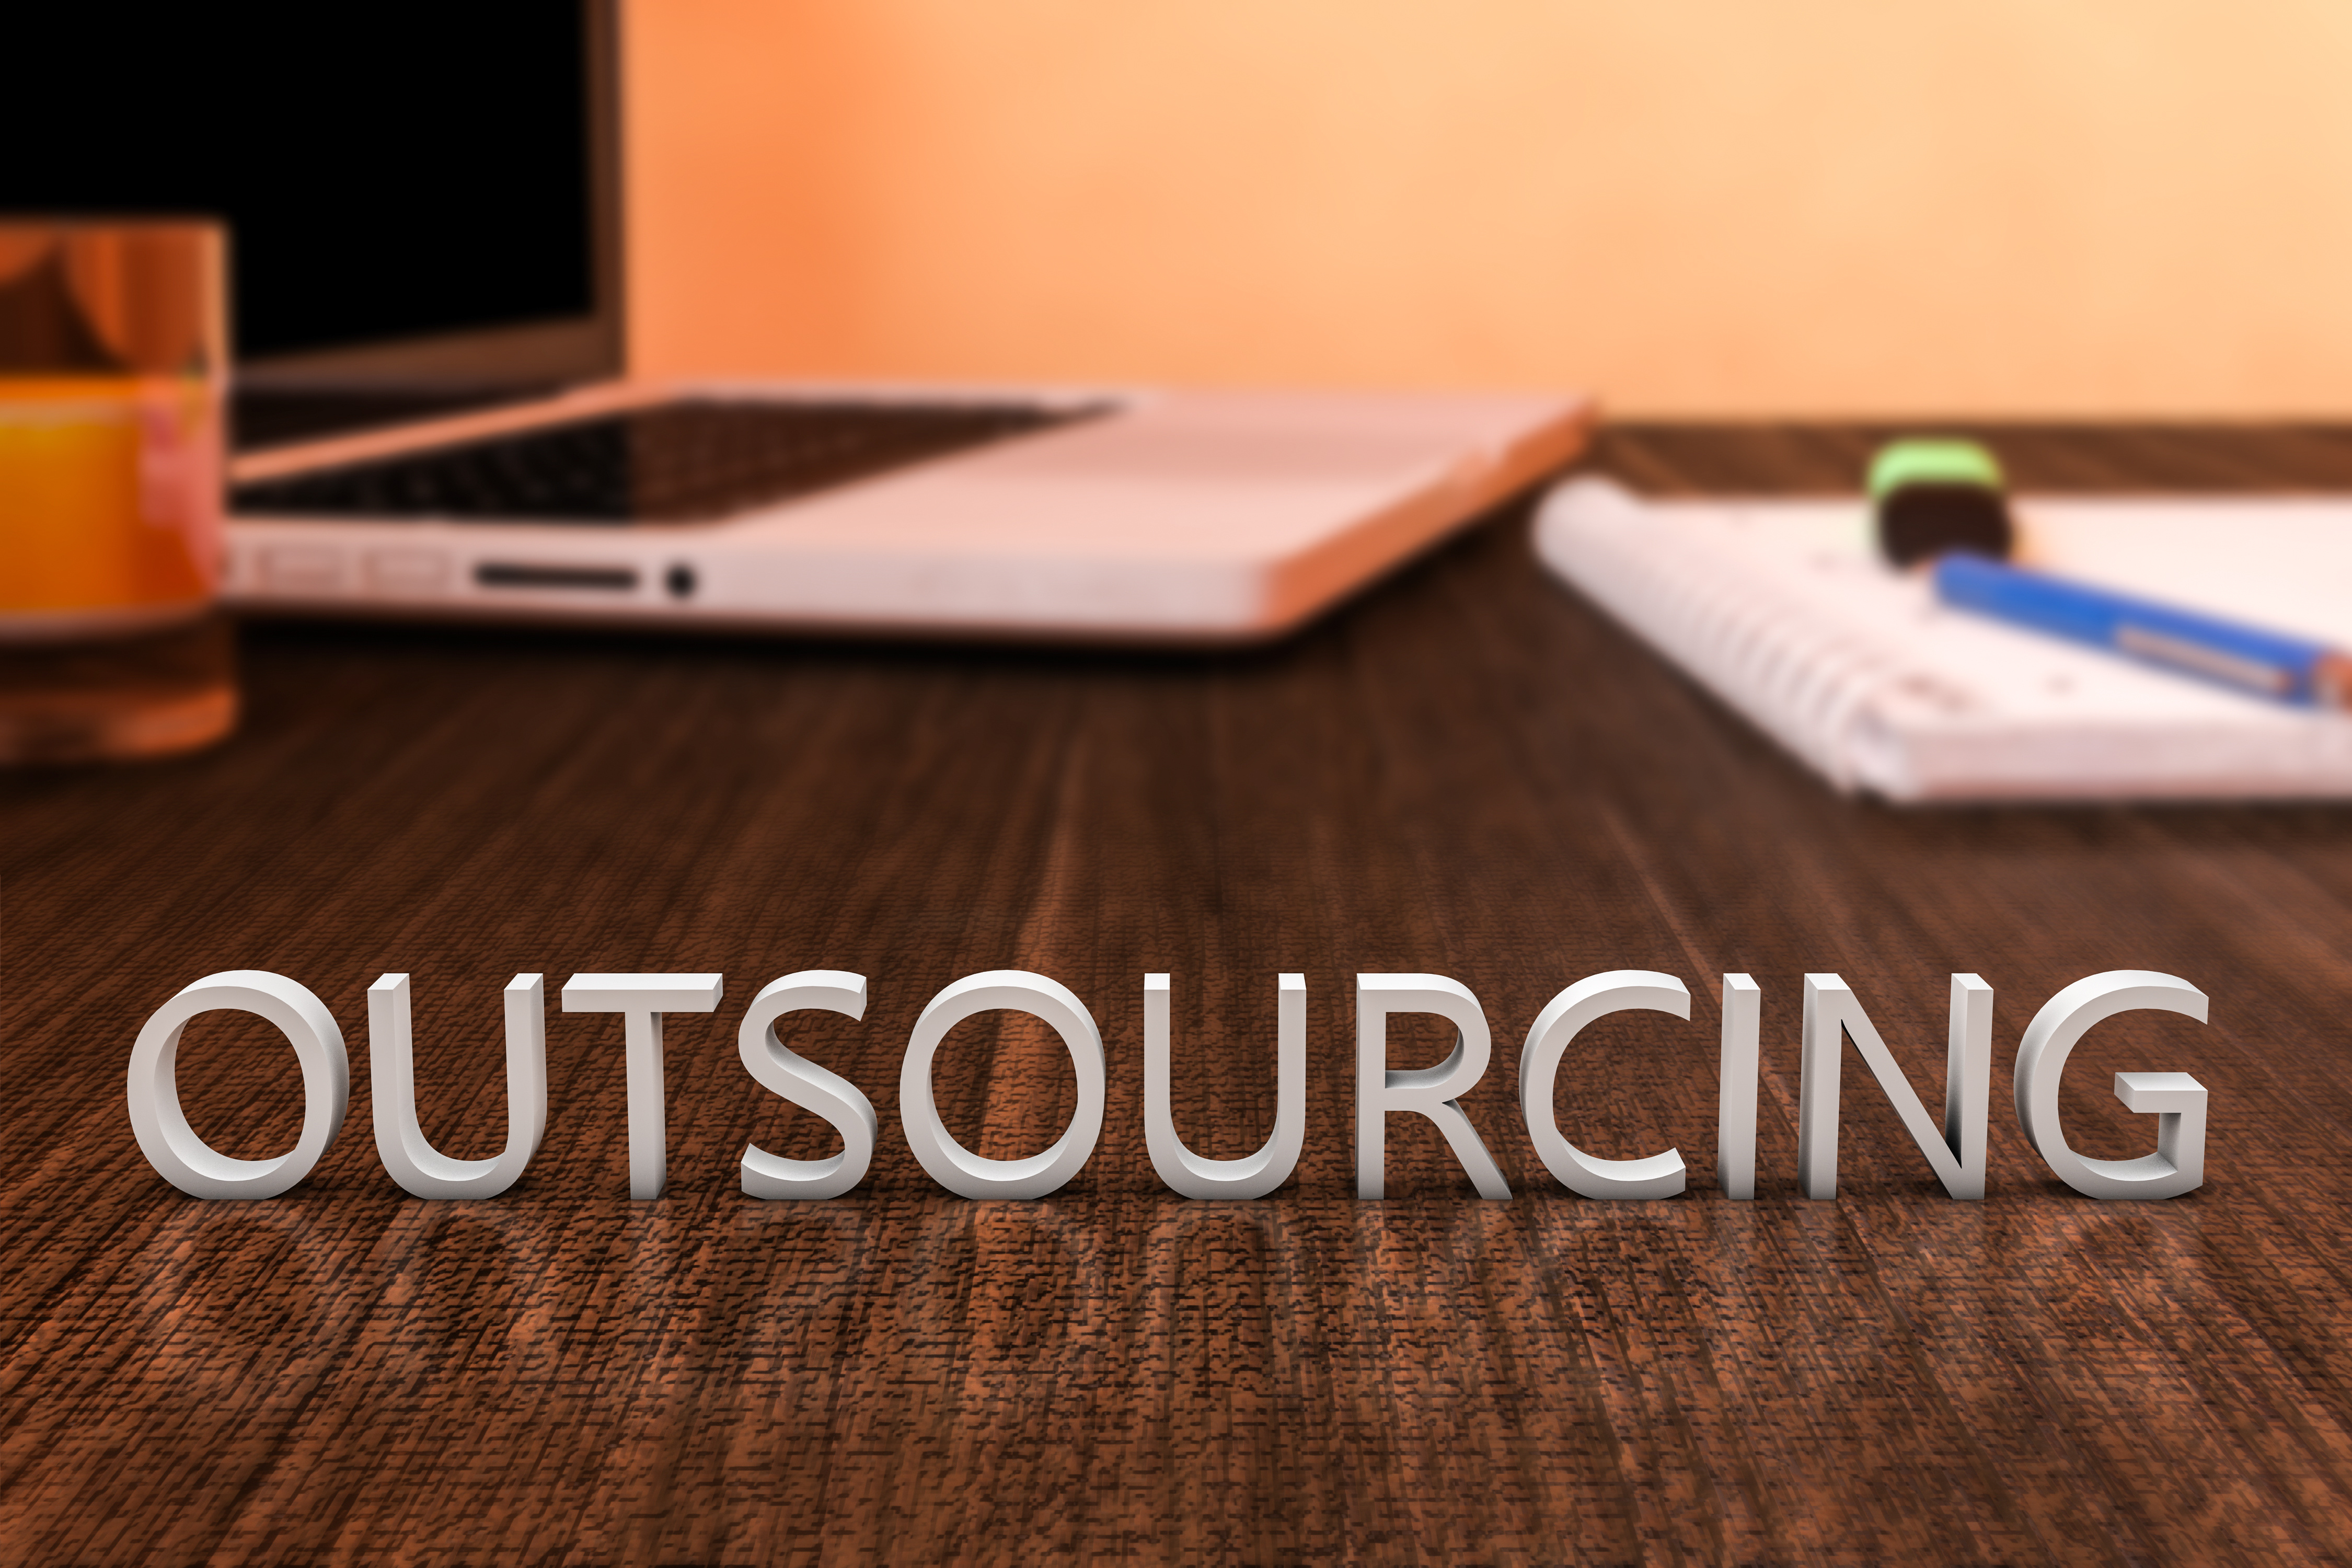 Outsourcing - letters on wooden desk with laptop computer and a notebook. 3d render illustration.